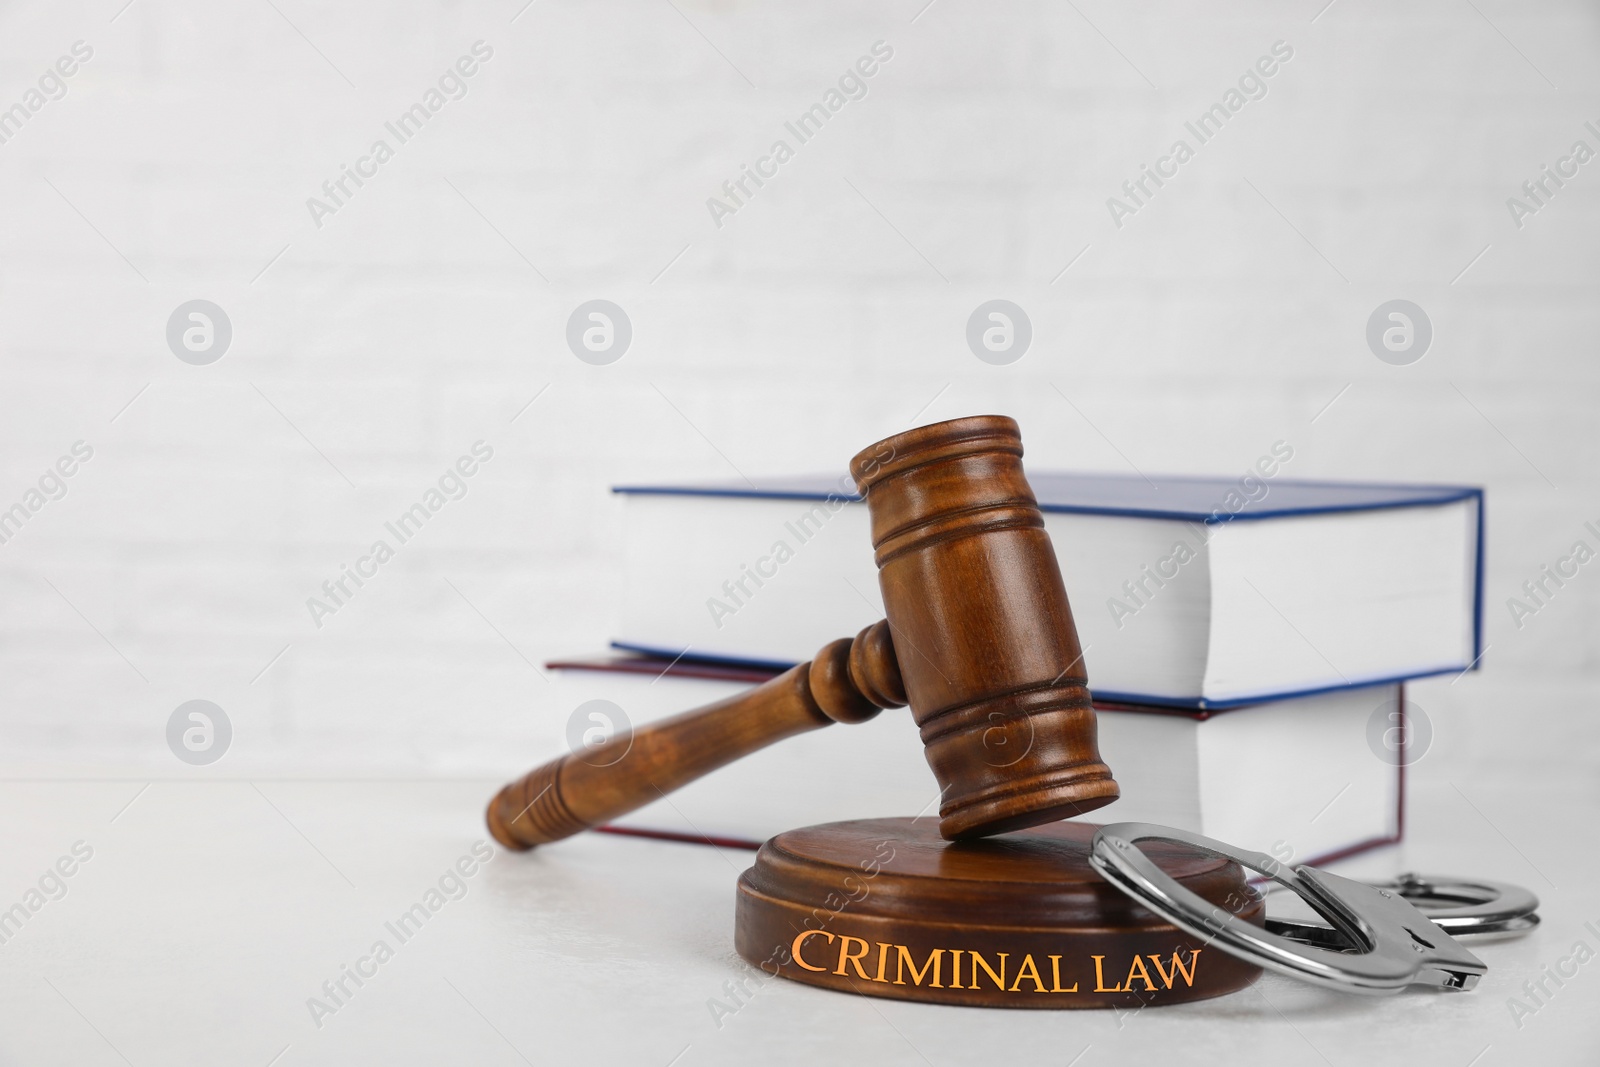 Image of Gavel, handcuffs and books on table against white background. Criminal law concept 